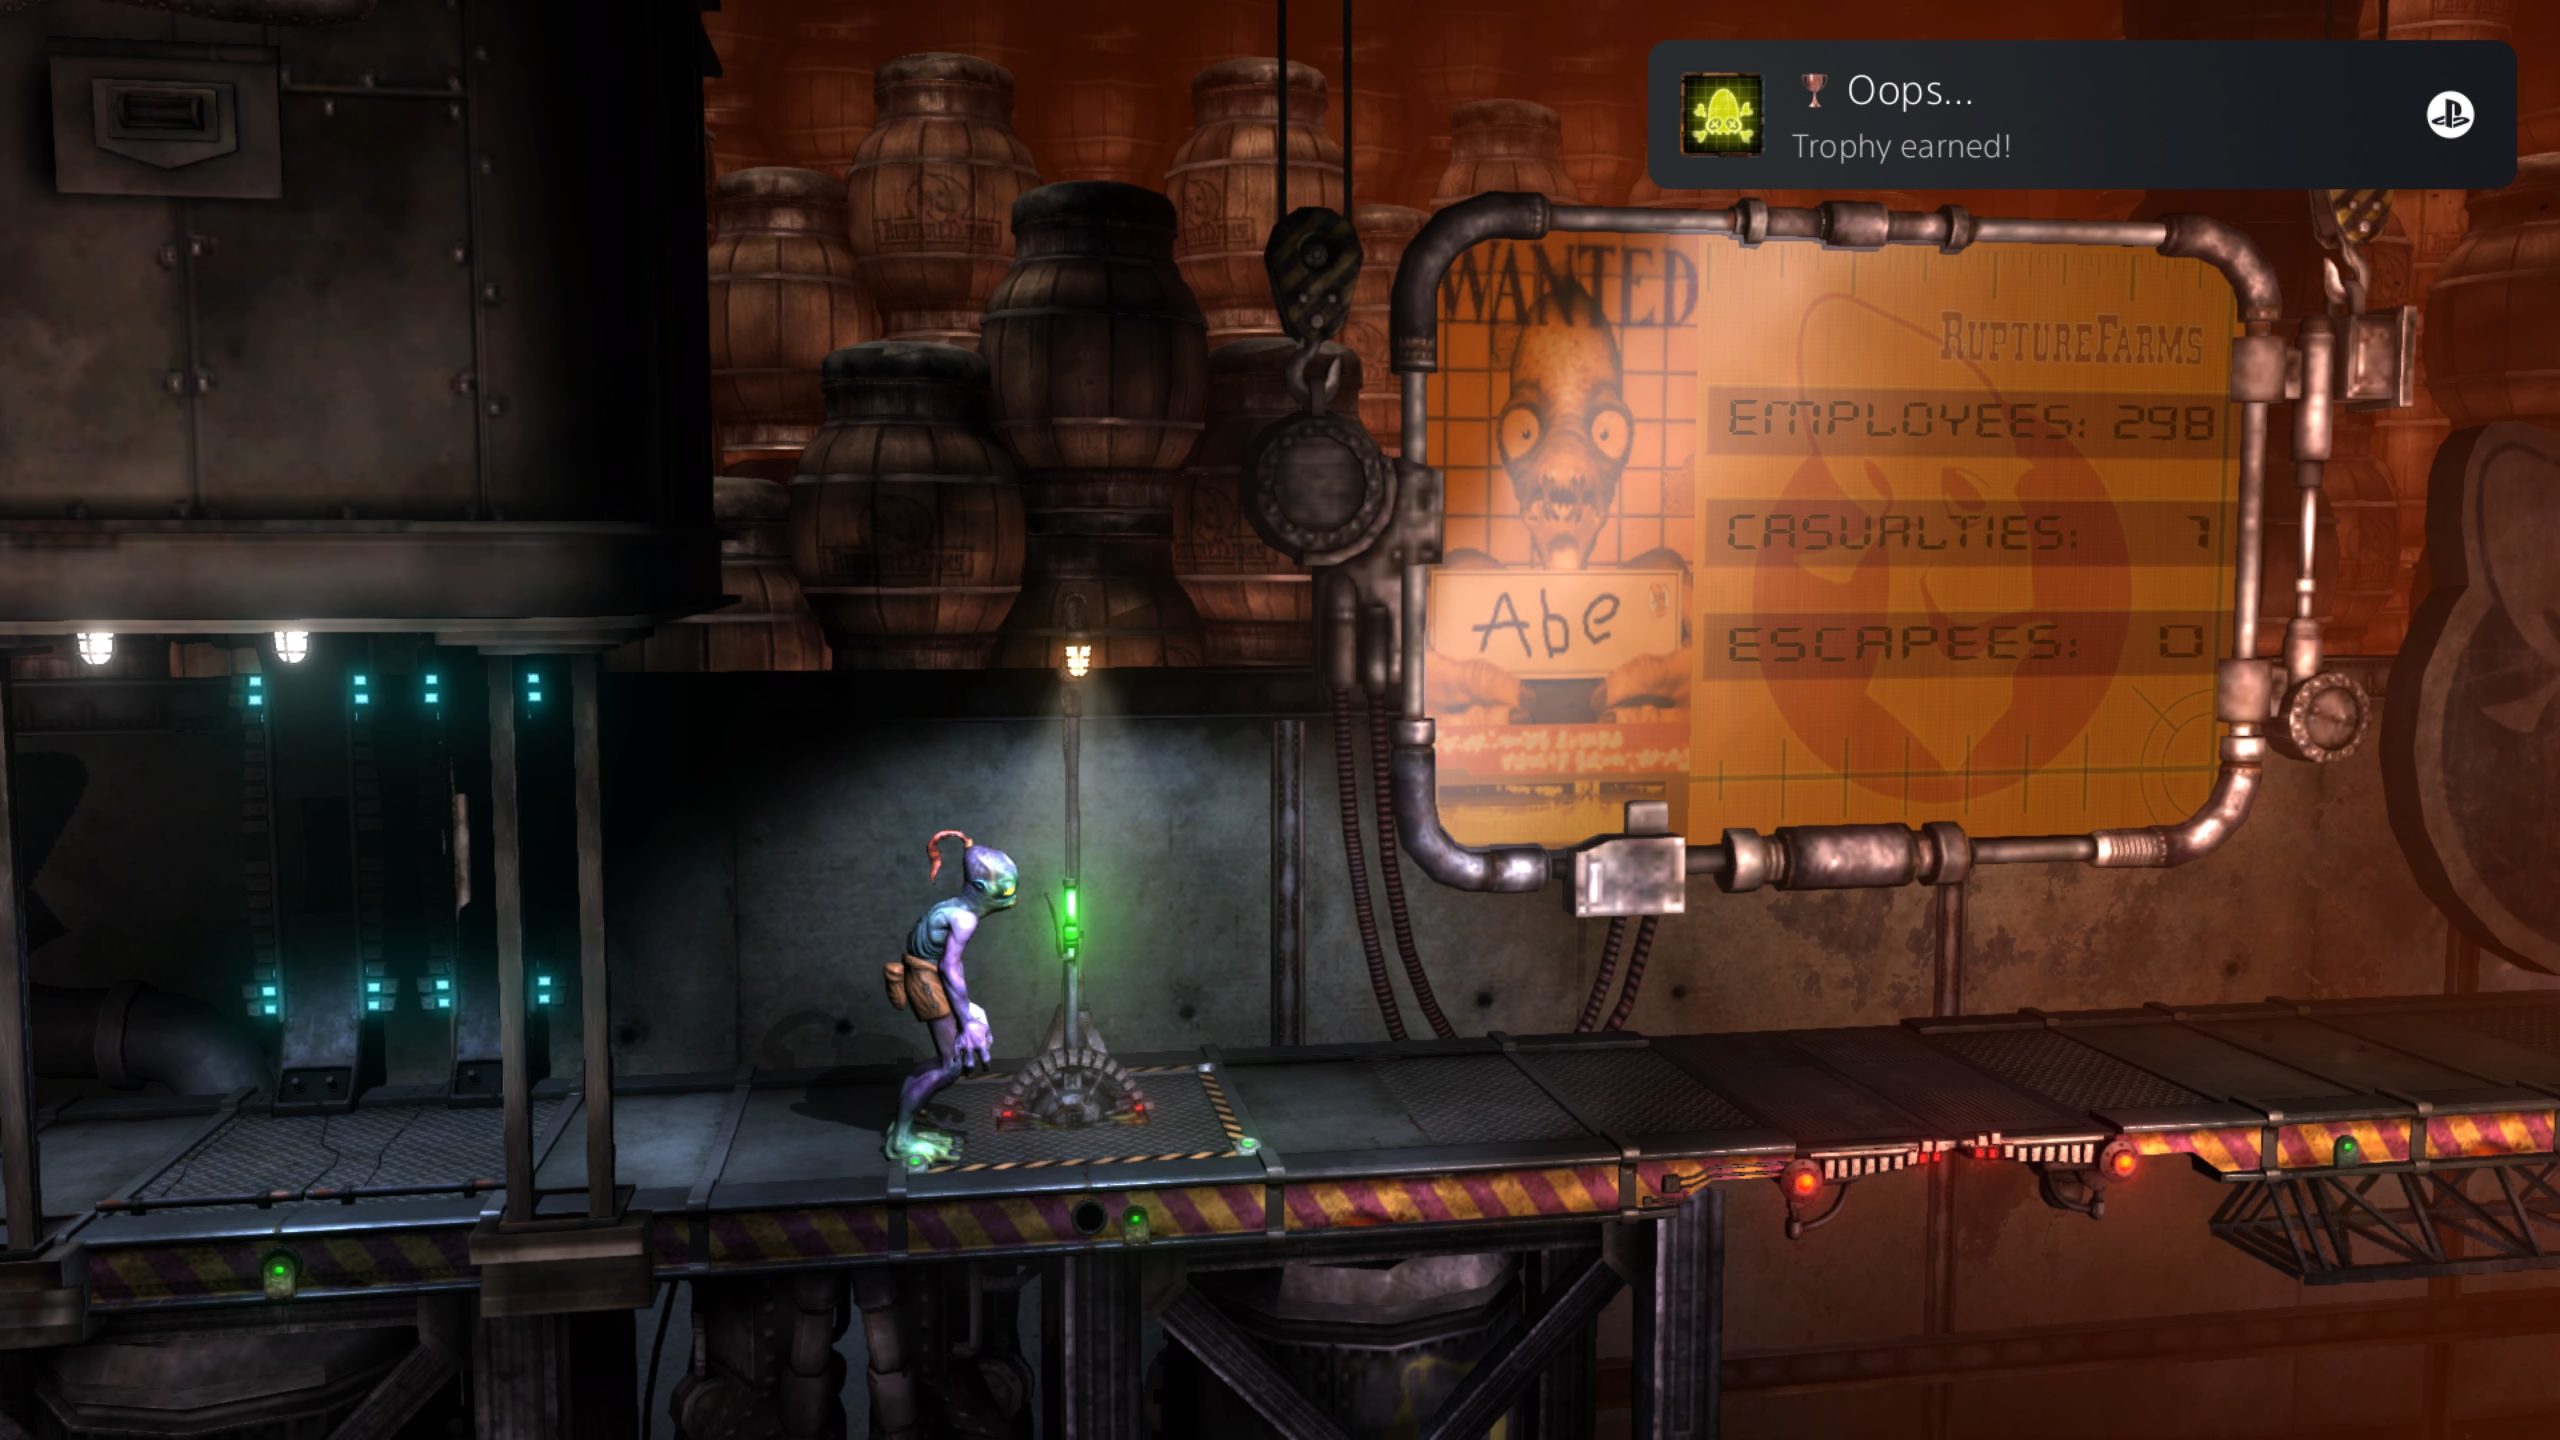 Right after a tutorial about levers, you're given a lever. I couldn't tell it controlled a trap door so I pulled it and accidentally killed the coworker standing over it. Thank goodness for quicksaves. (Screenshot: Oddworld Inhabitants, Inc. / Kotaku)